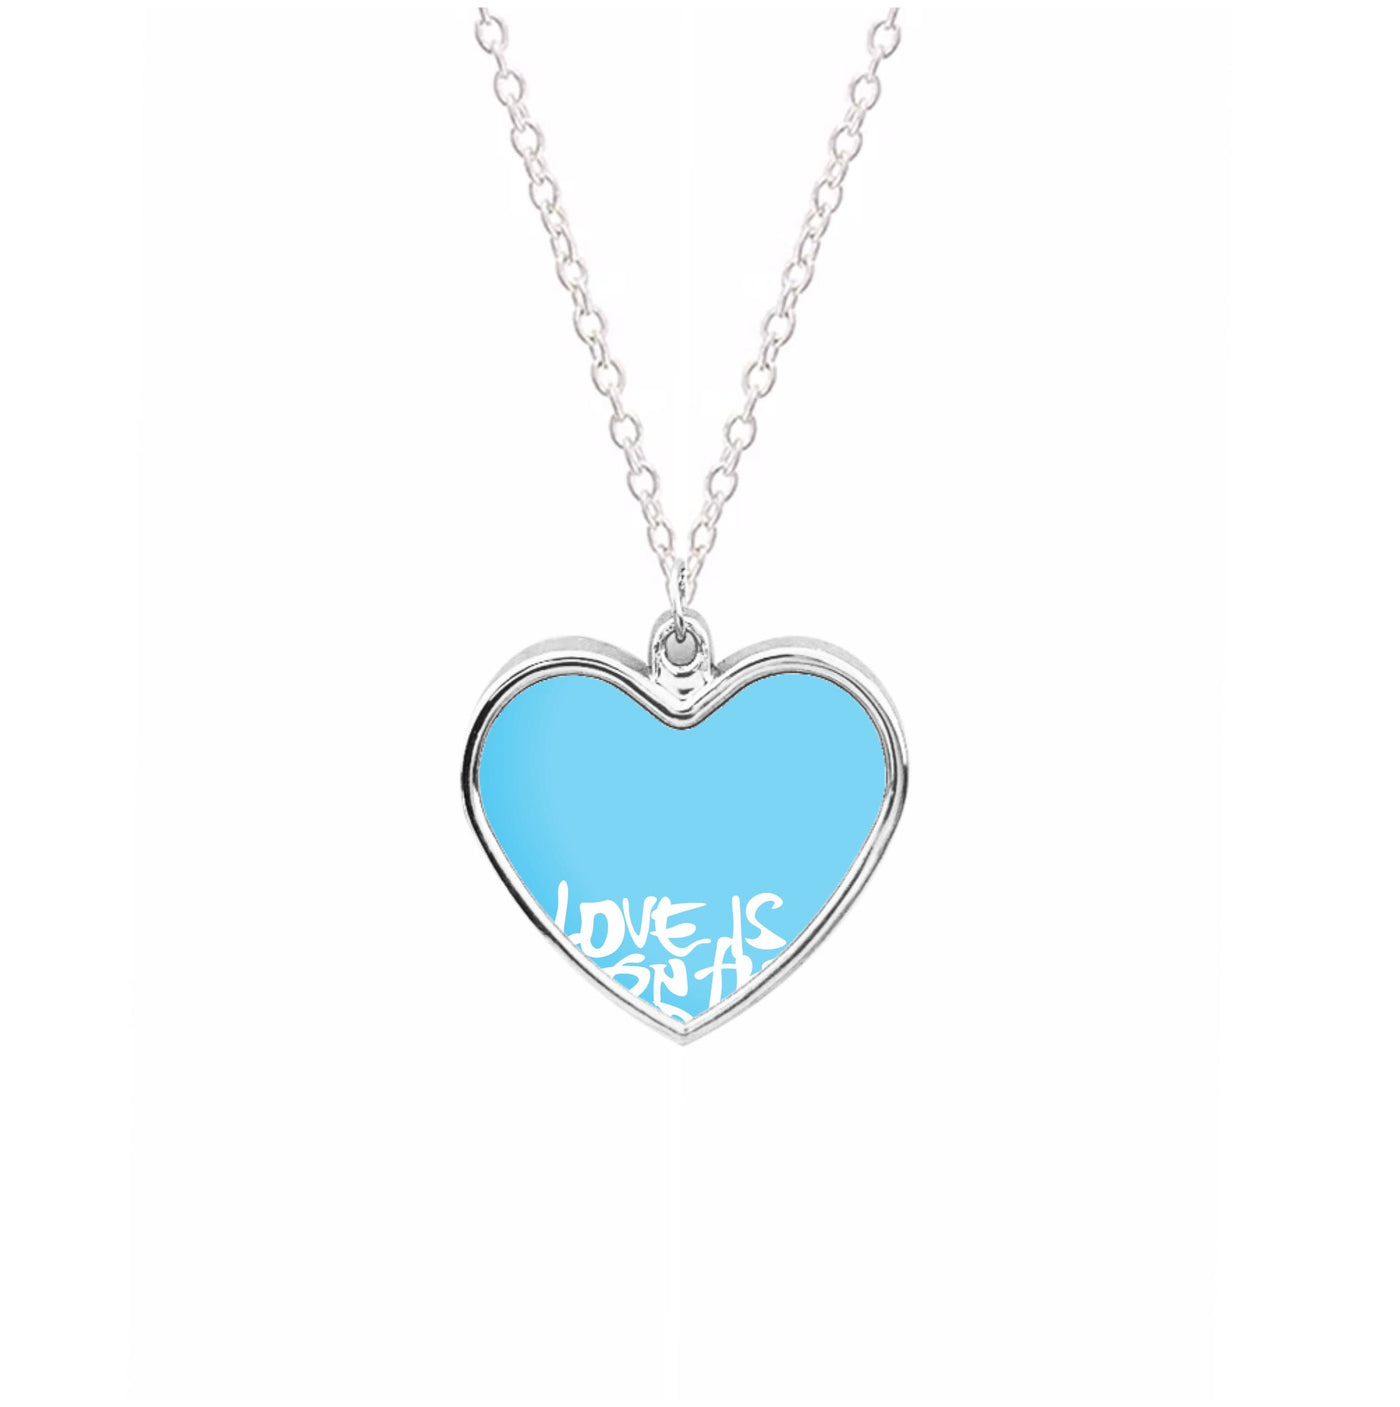 Love Is On The Radio - McFly Necklace